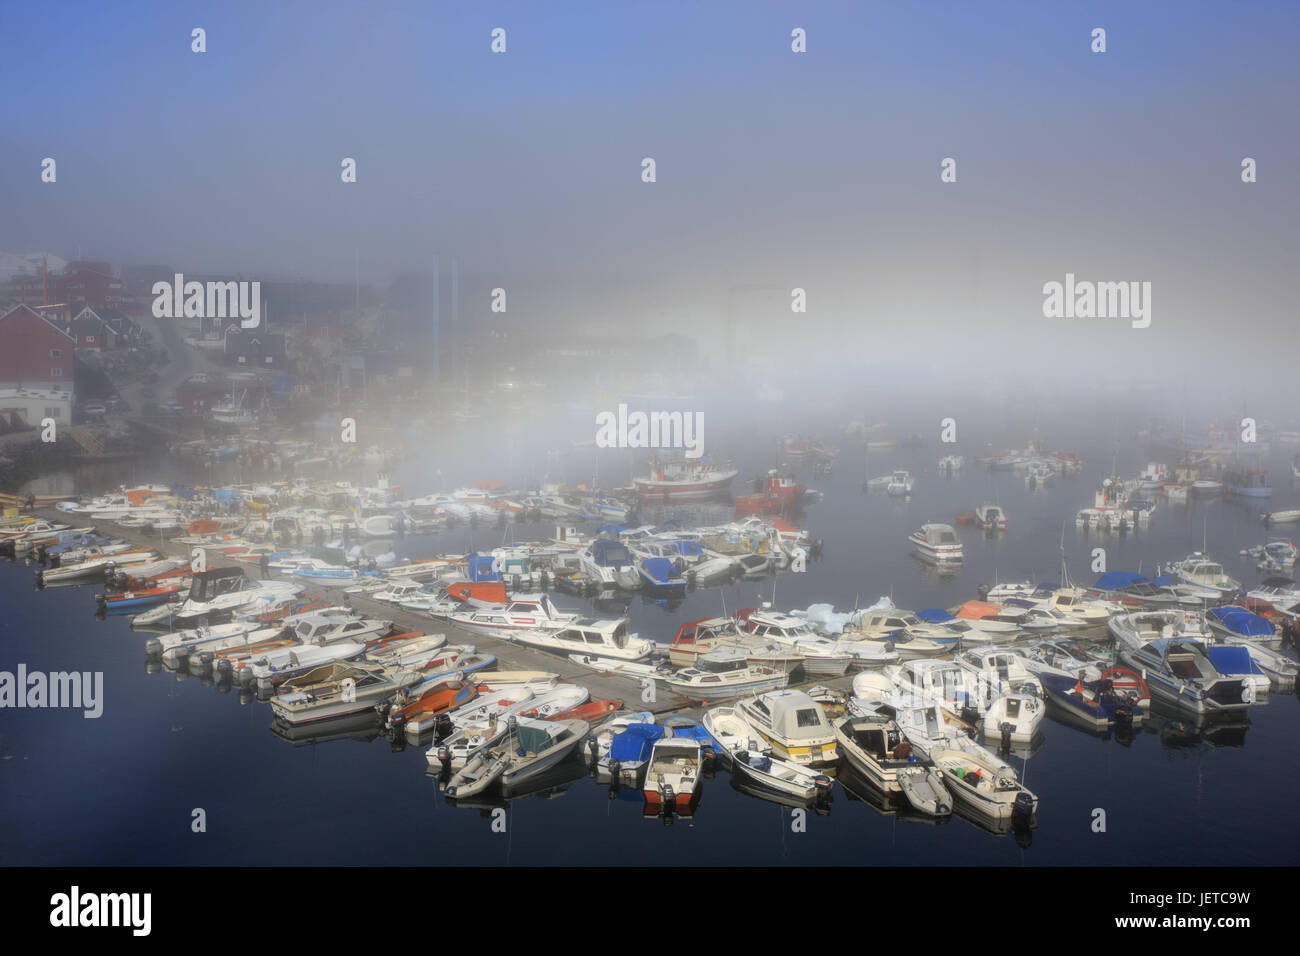 Greenland, Disco Bay, Ilulissat, fjord, harbour, boats, fog, overview, Western Greenland, town, port, landing stage, pier, mole, bridge, boats, motorboats, foggy, nebulous bows, natural phenomenon, the Arctic, sea, water, Stock Photo